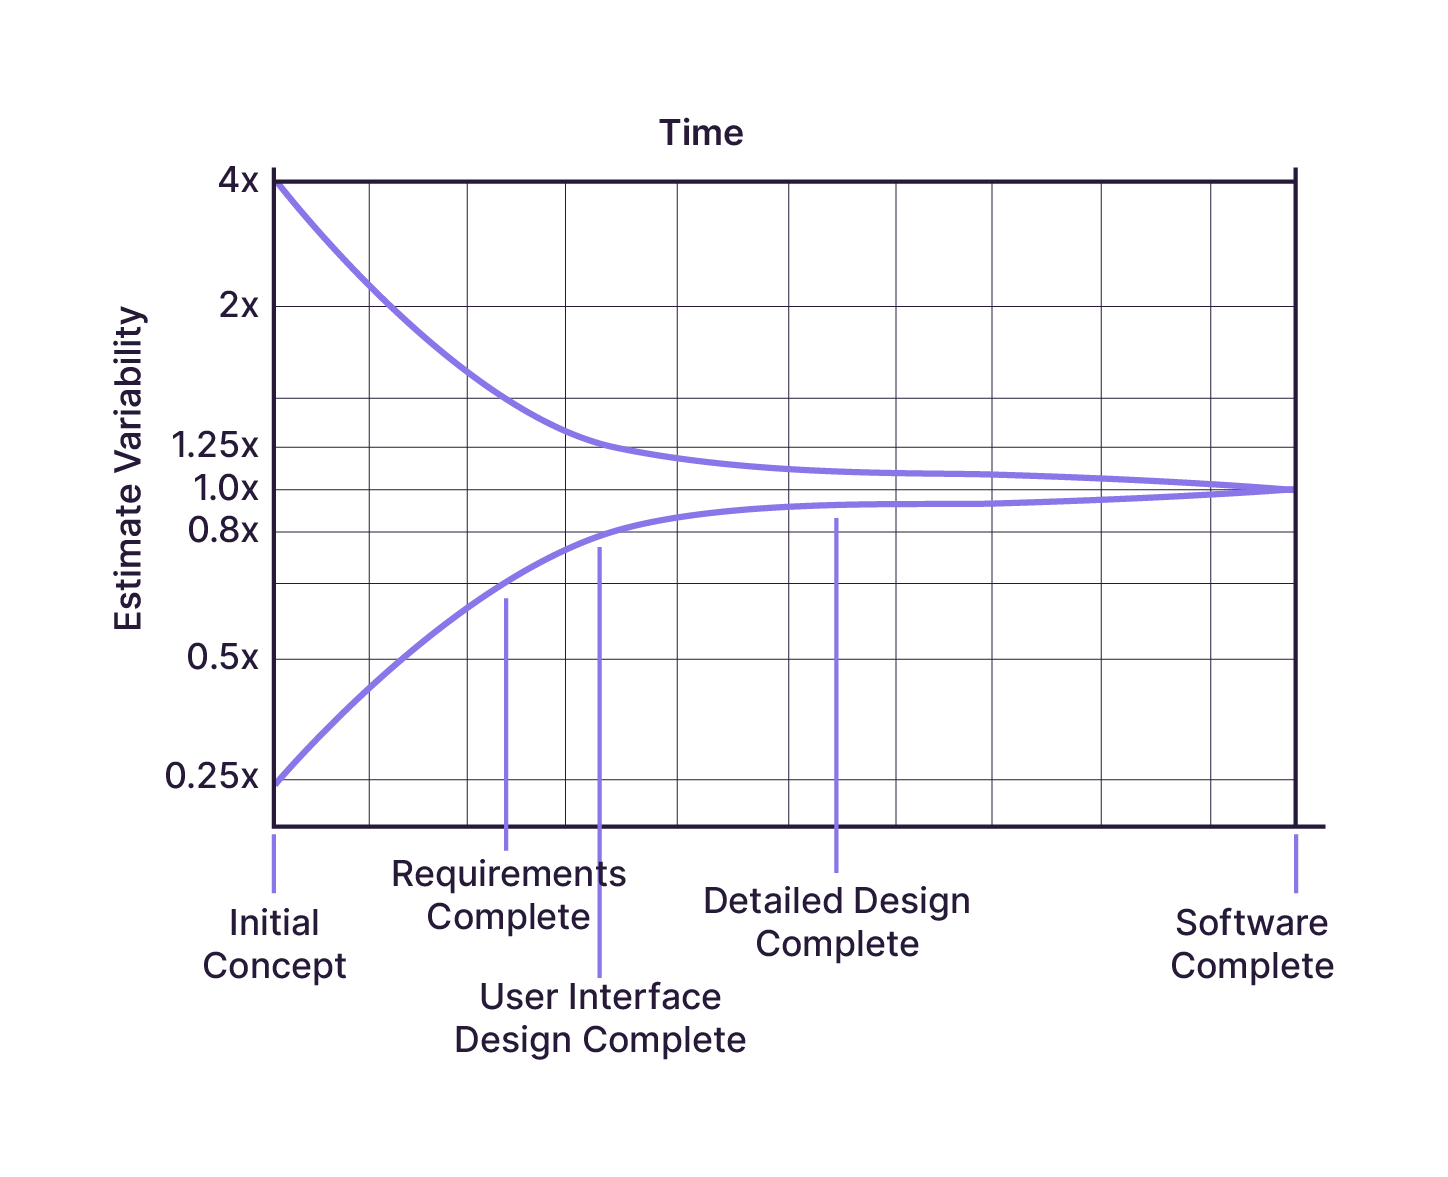 A graph illustrating the 'cone of uncertainty' in project development. As the project progresses from 'Initial Concept' to 'Software Complete,' the estimate variability narrows, showing reduced uncertainty over time.